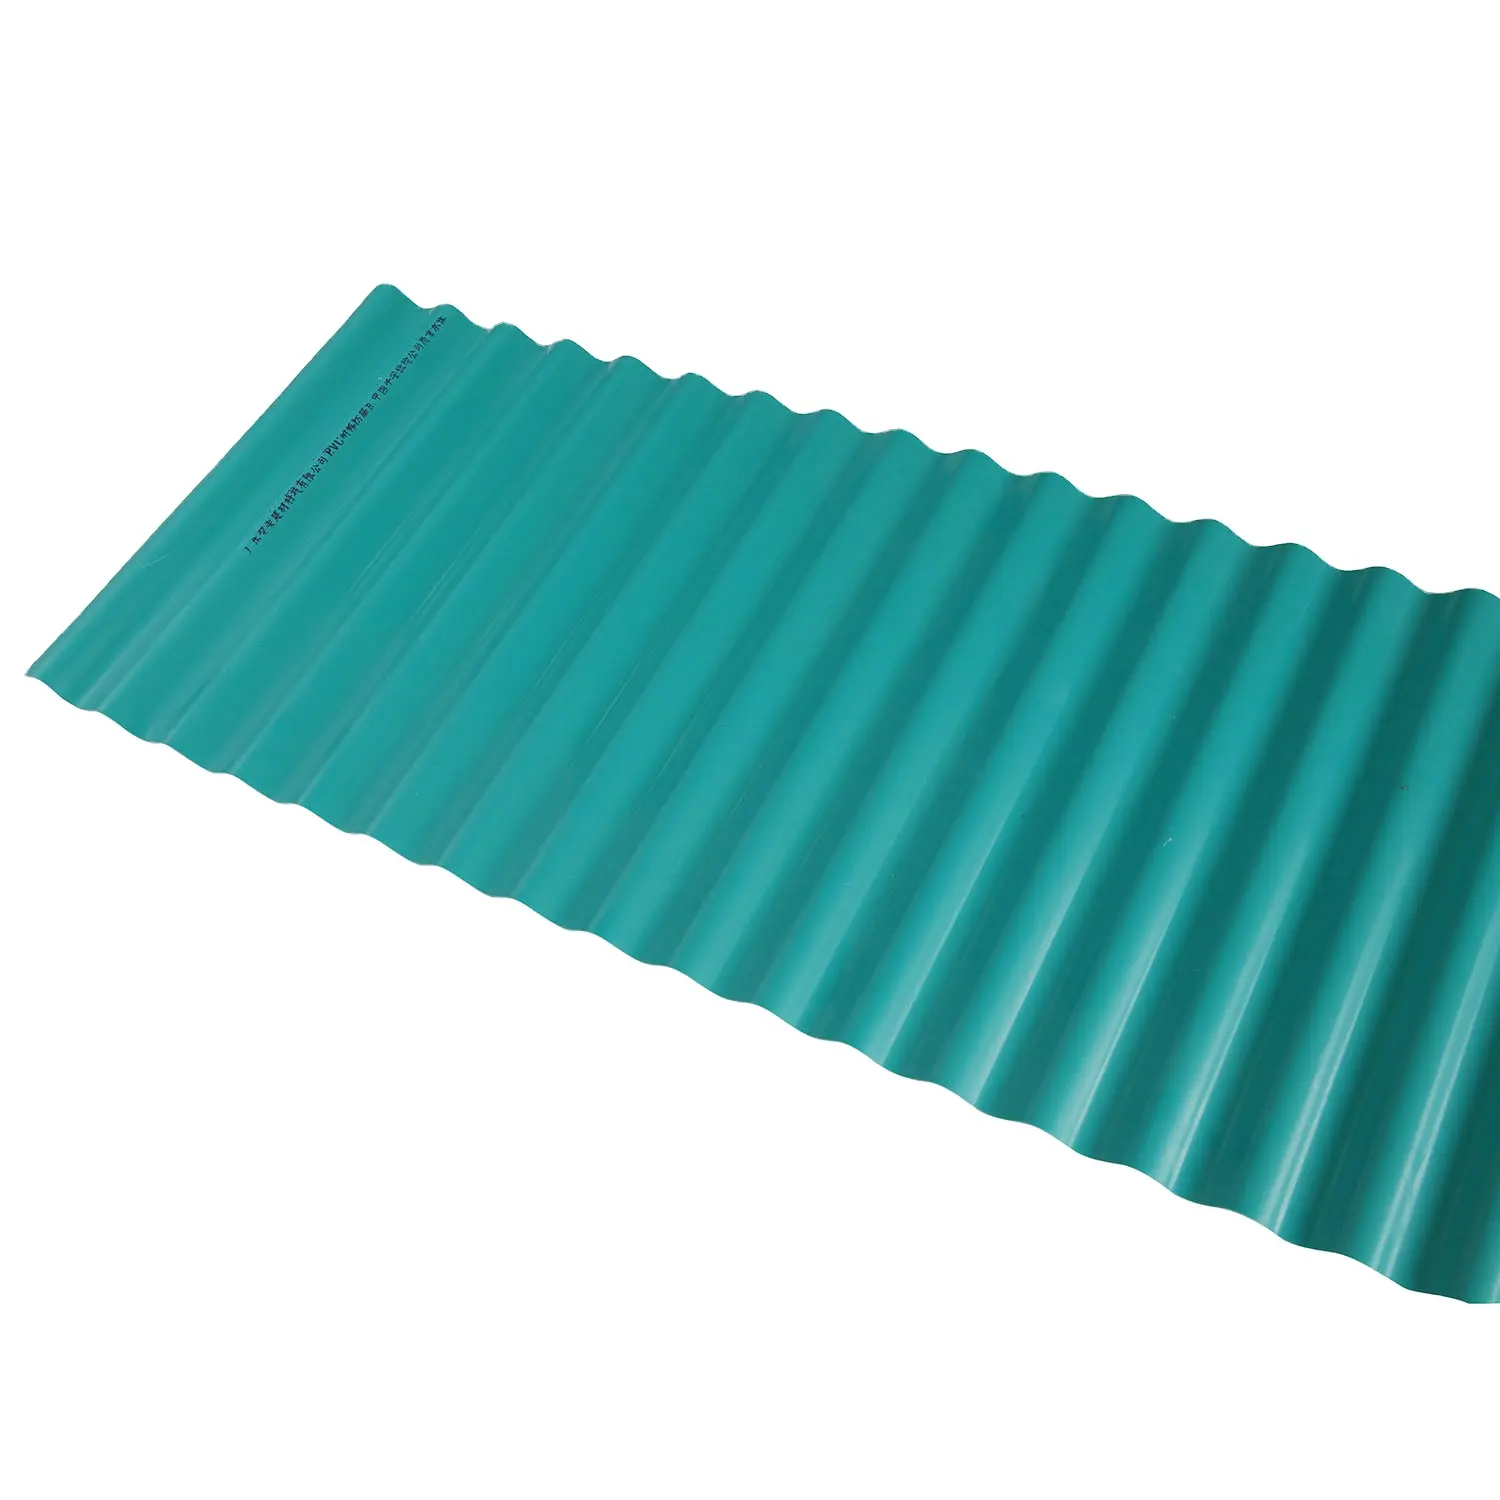 High Quality Classical UPVC Corrugated Roofing Sheets Various Colors Excellent for Tile Roofing